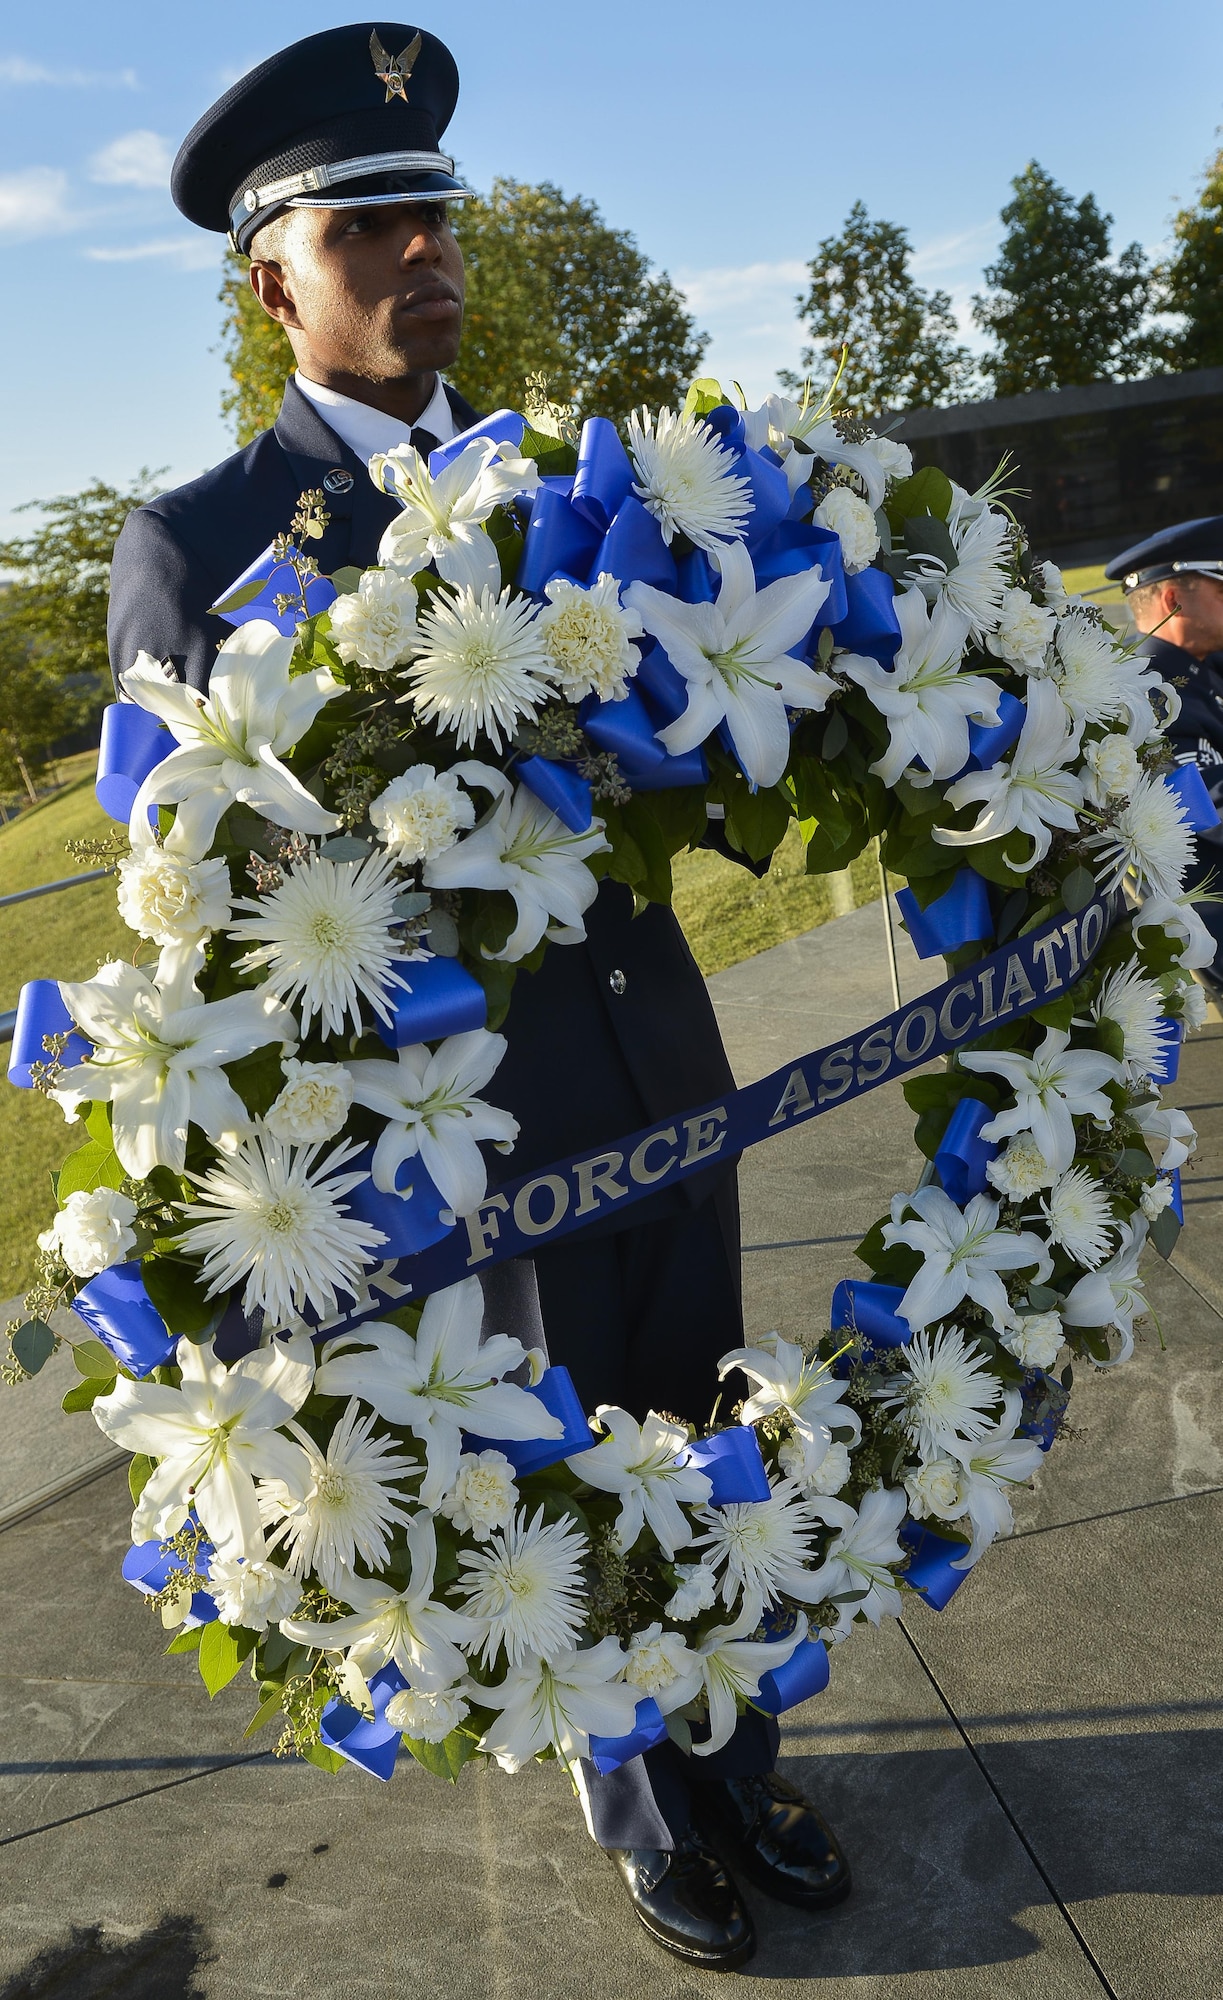 The Air Force's 12 Outstanding Airmen of the Year, Air Force senior leaders and Air Force Association members gathered for an early morning memorial service and wreath laying ceremony Sept. 15, 2013, at the Air Force Memorial Arlington, Va. Laying the wreath were Air Force Assistant Vice Chief of Staff Lt. Gen. Stephen Hoog,  Air Force Association Chairman of the Board Mr. George Muellner and Chief Master Sergeant of the Air Force James Cody. (U.S. Air Force photo/Jim Varhegyi)